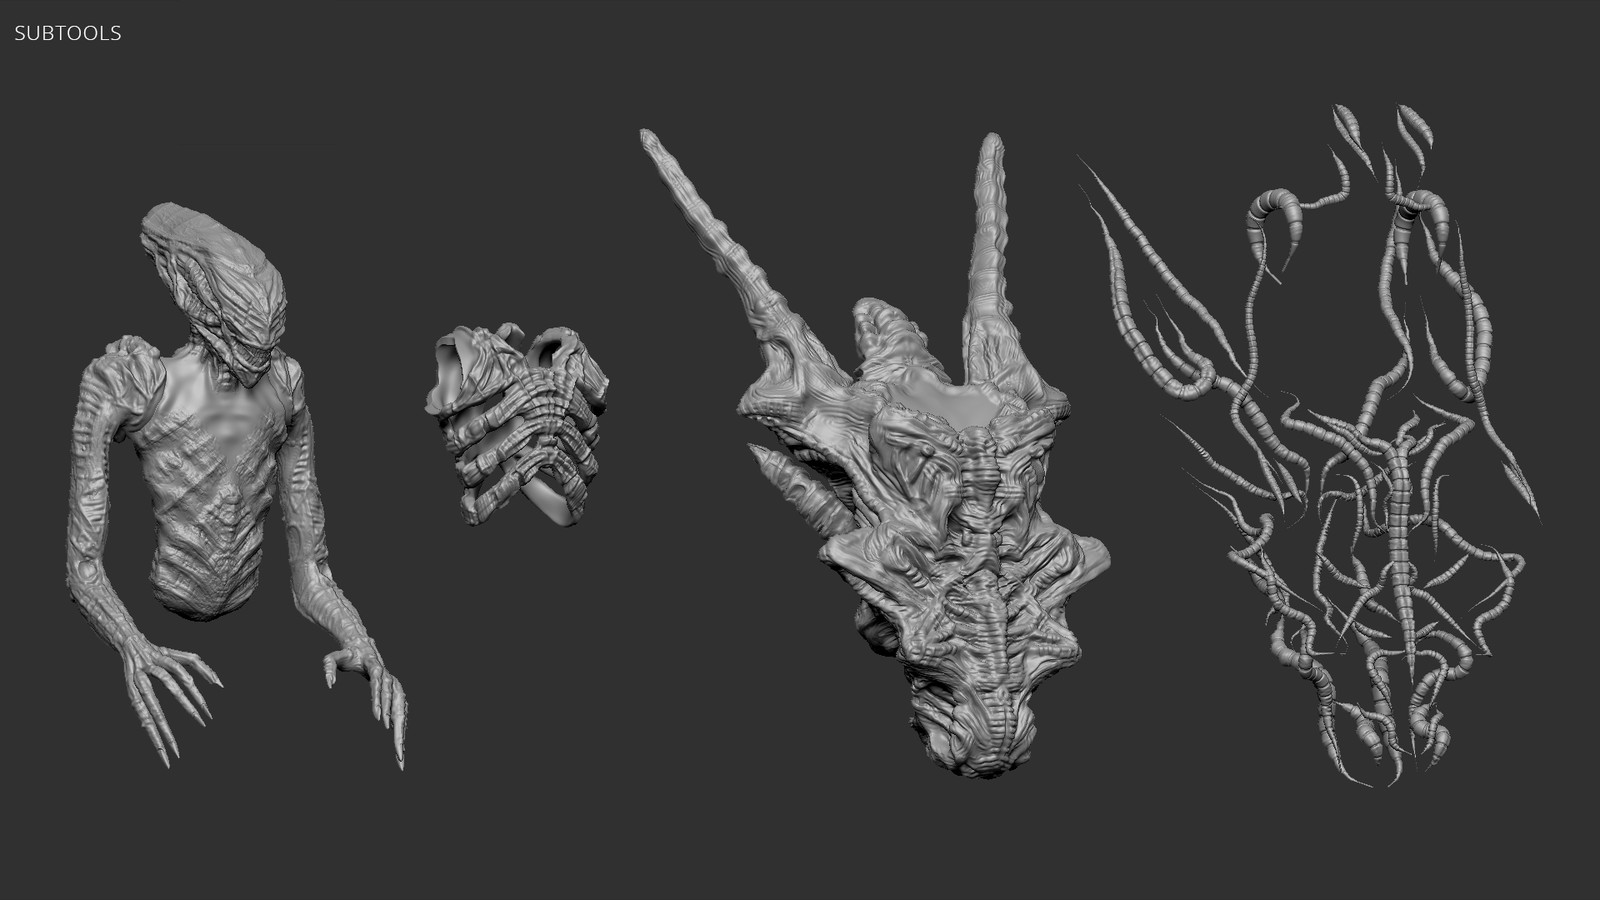 ZBrush - Decomposition of the Xenomorph tool.